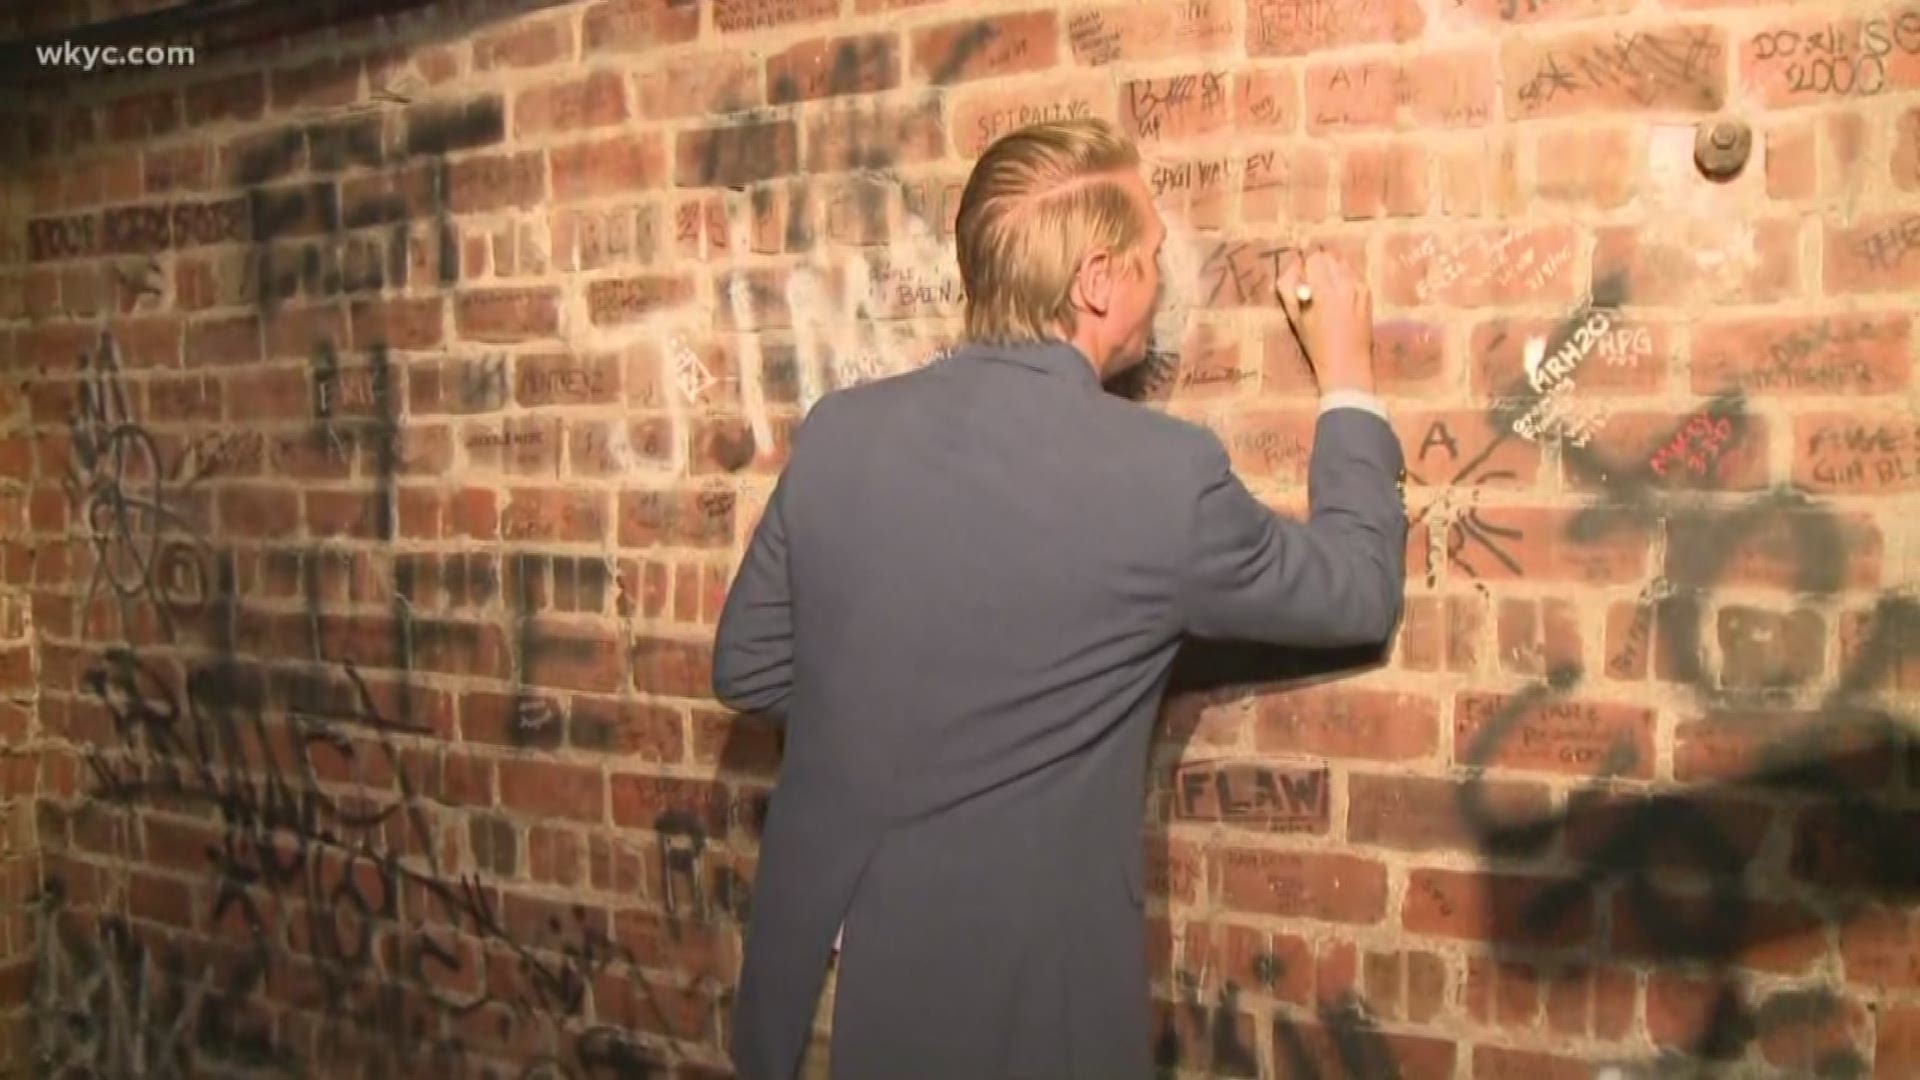 July 19, 2018: WKYC's Will Ujek gets the chance to put his autograph on the iconic Agora Theatre's signature wall.